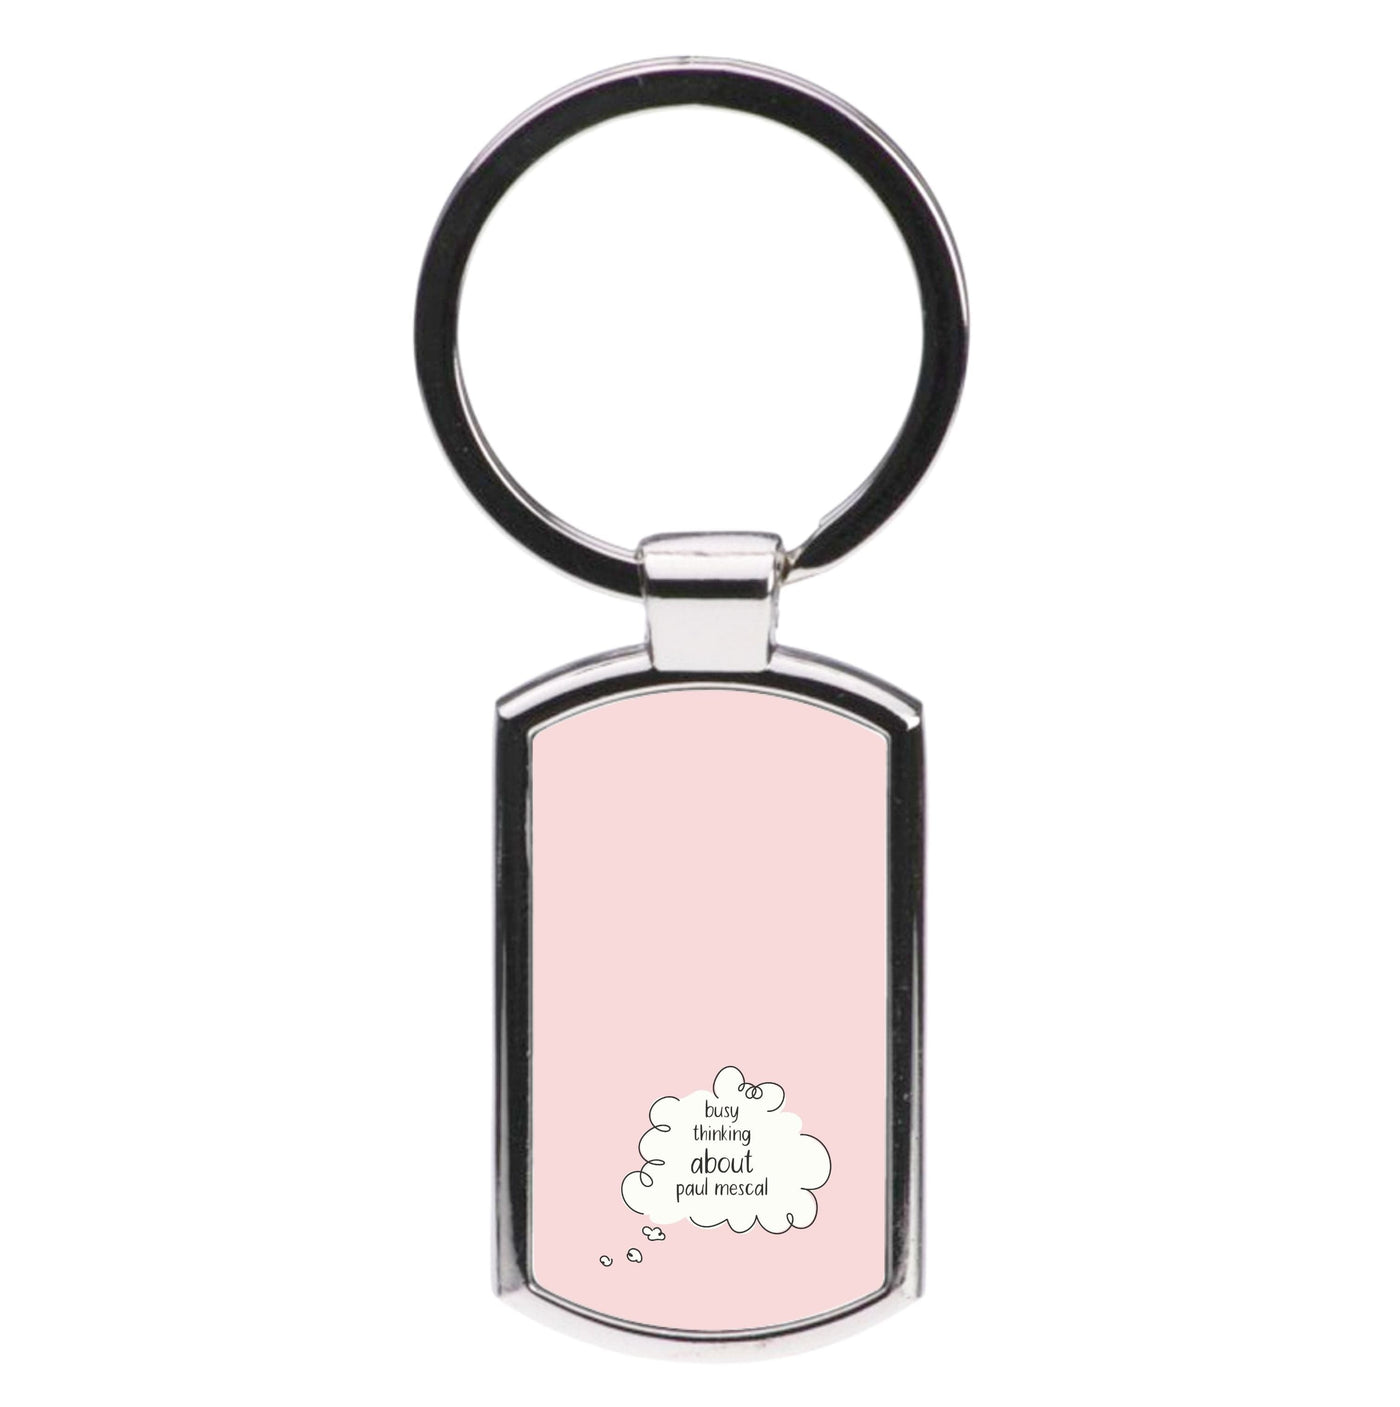 Busy Thinking About Paul Mescal Luxury Keyring